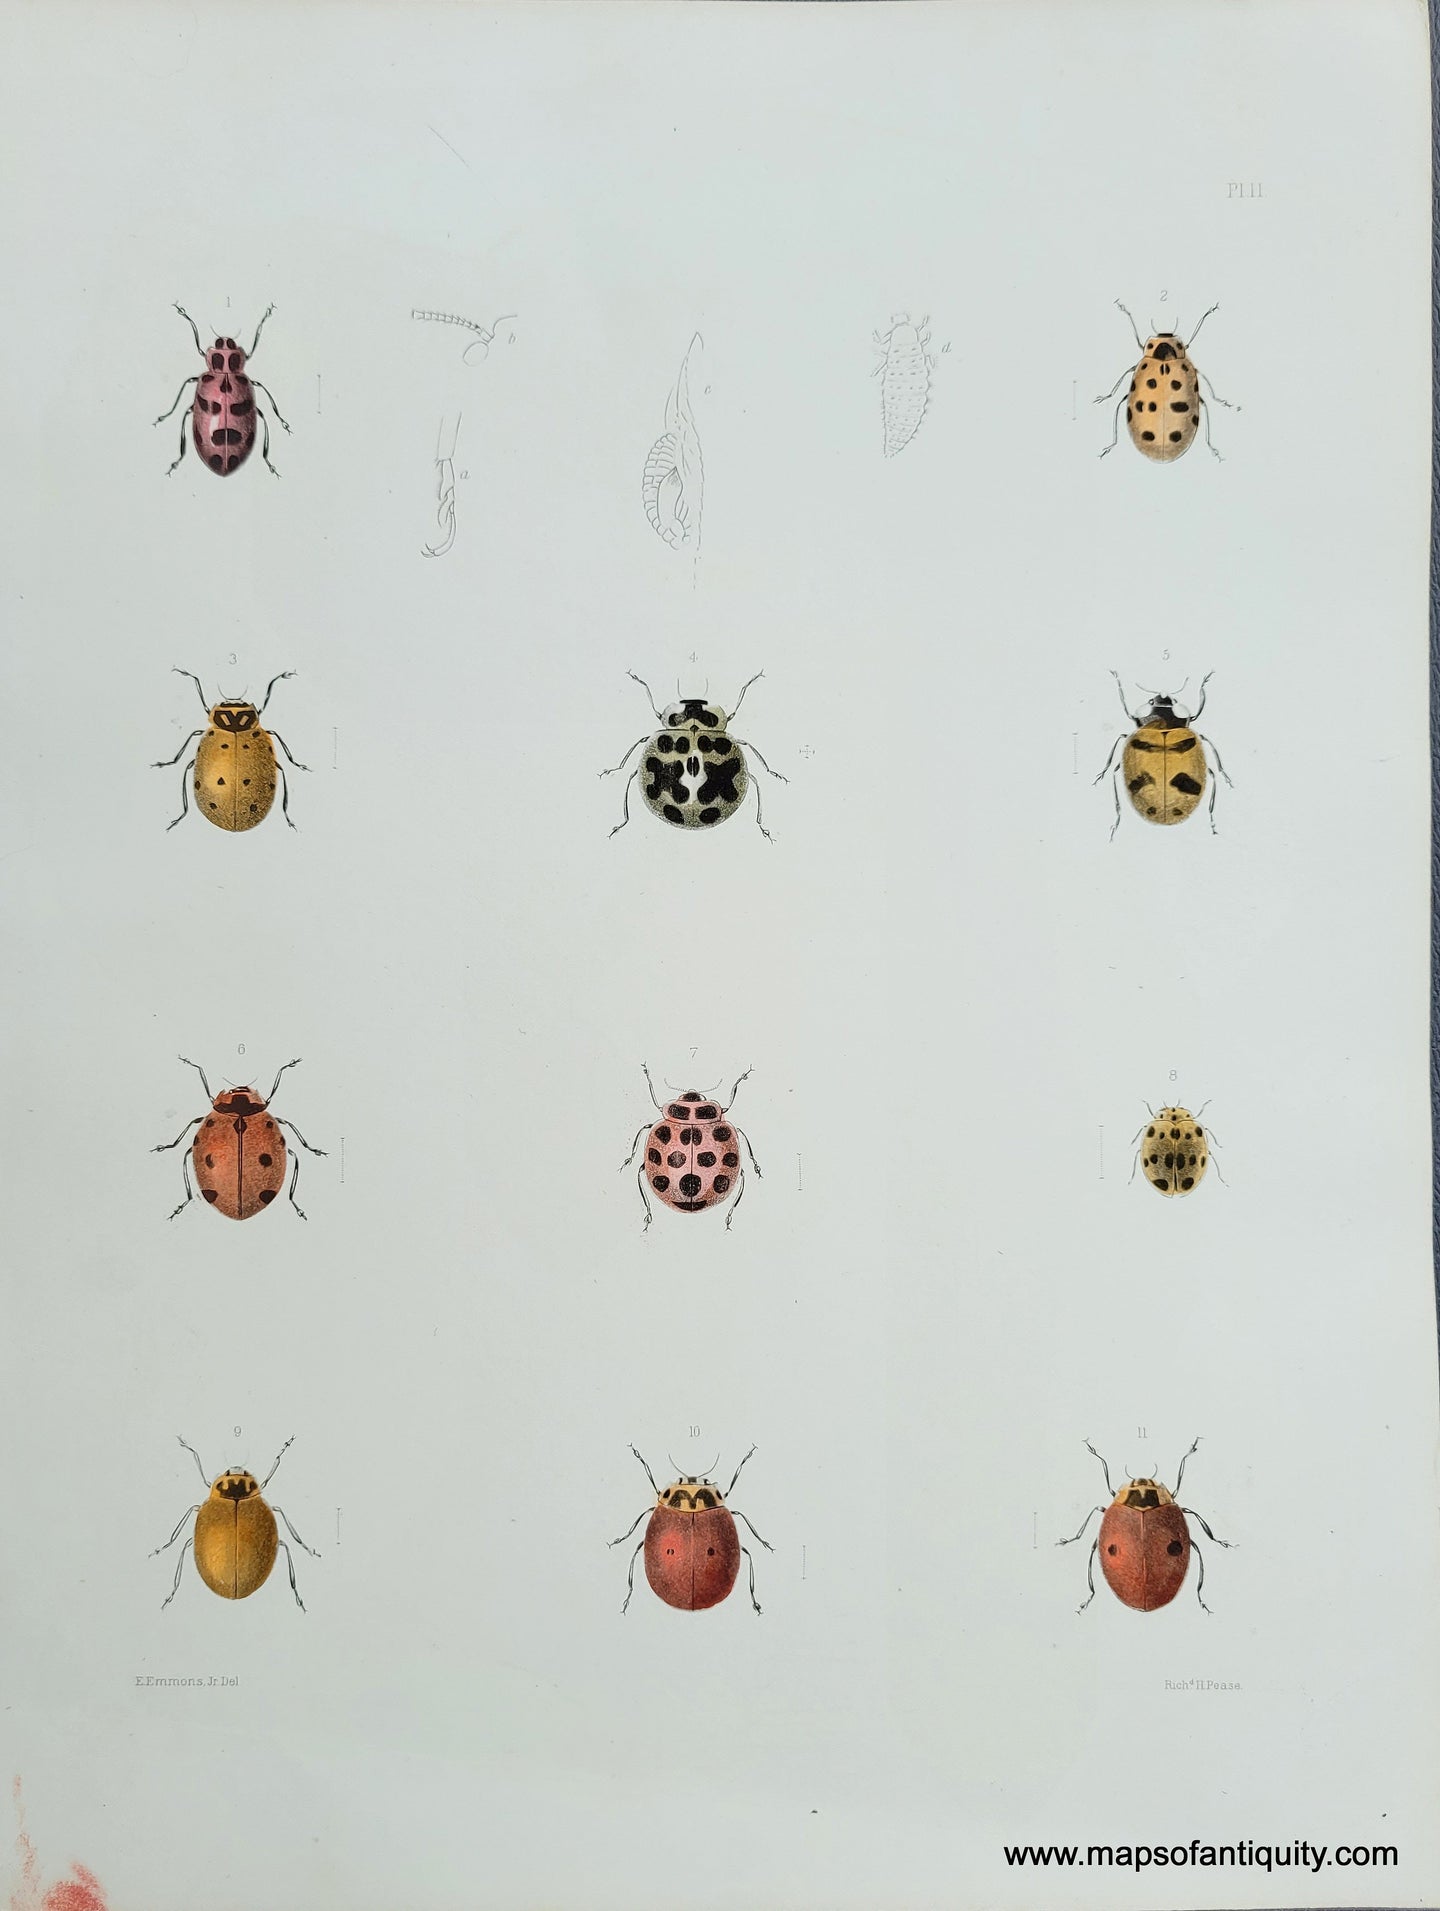 Genuine-Antique-Print-Spotted-Beetles---Ladybugs?-1854-Pease-Maps-Of-Antiquity